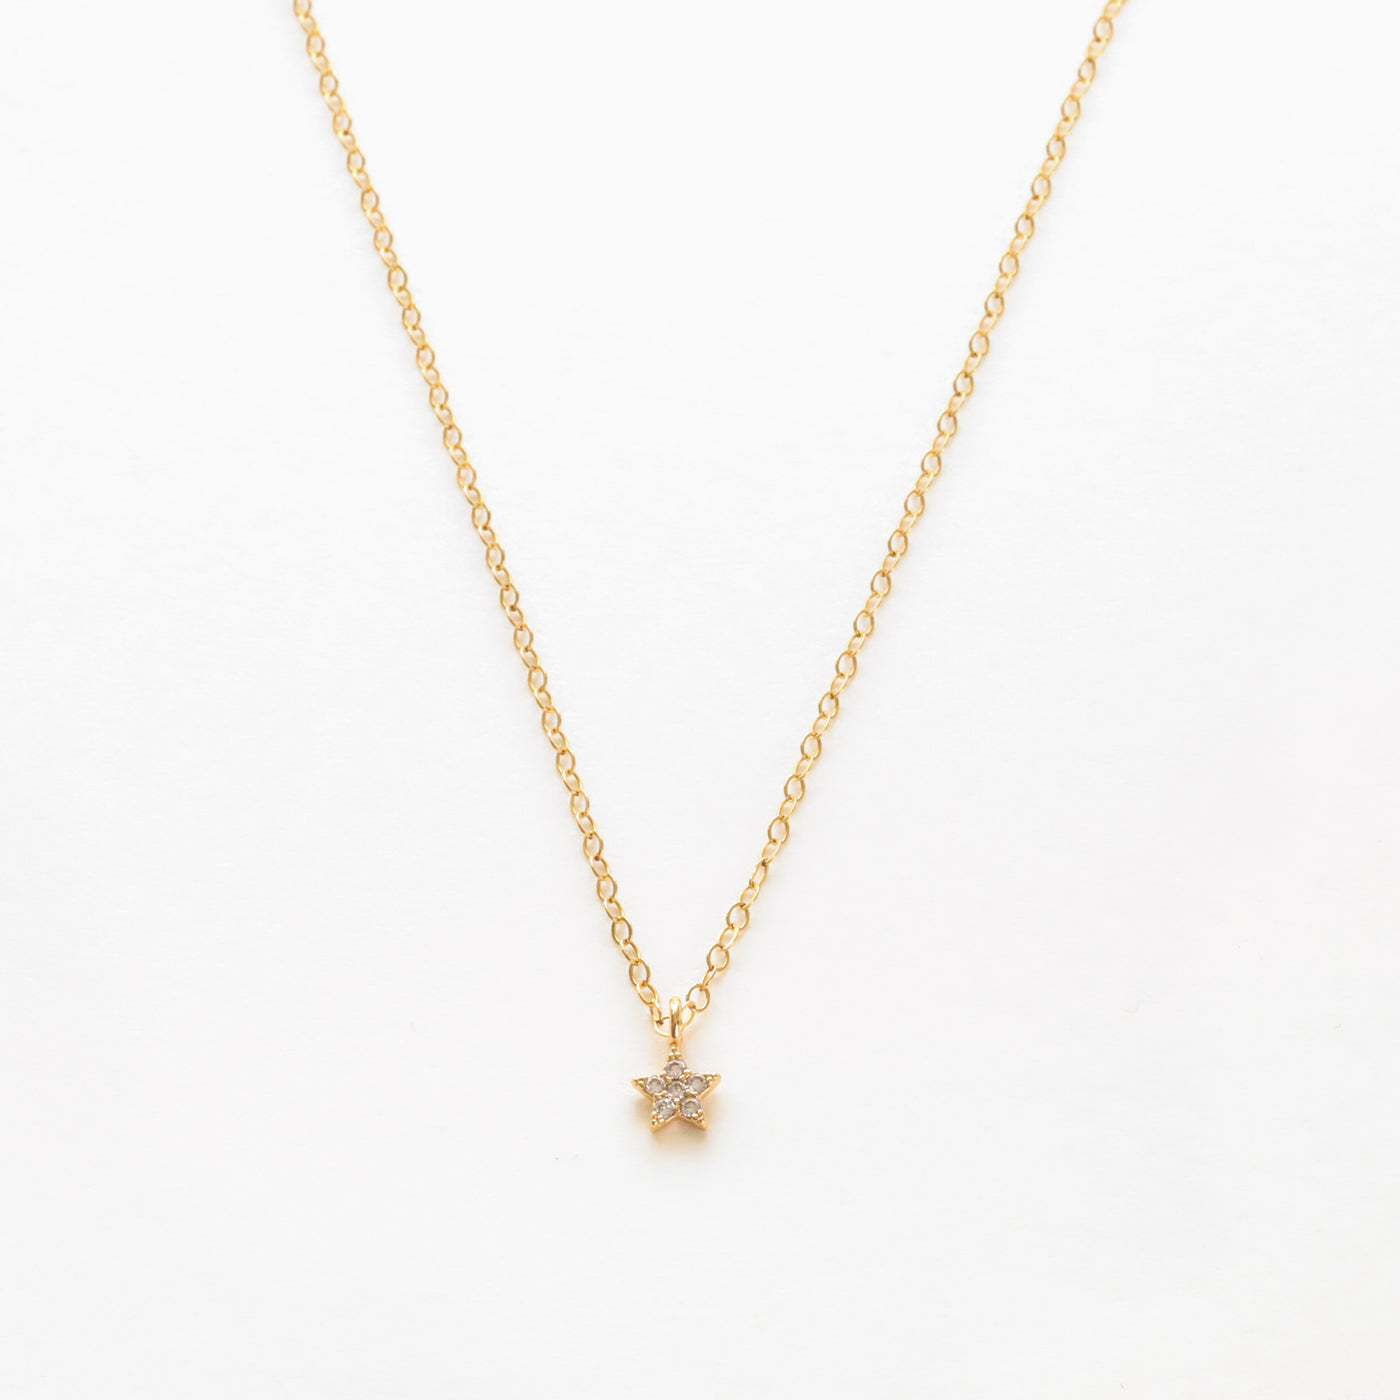 Gold filled dainty star necklace